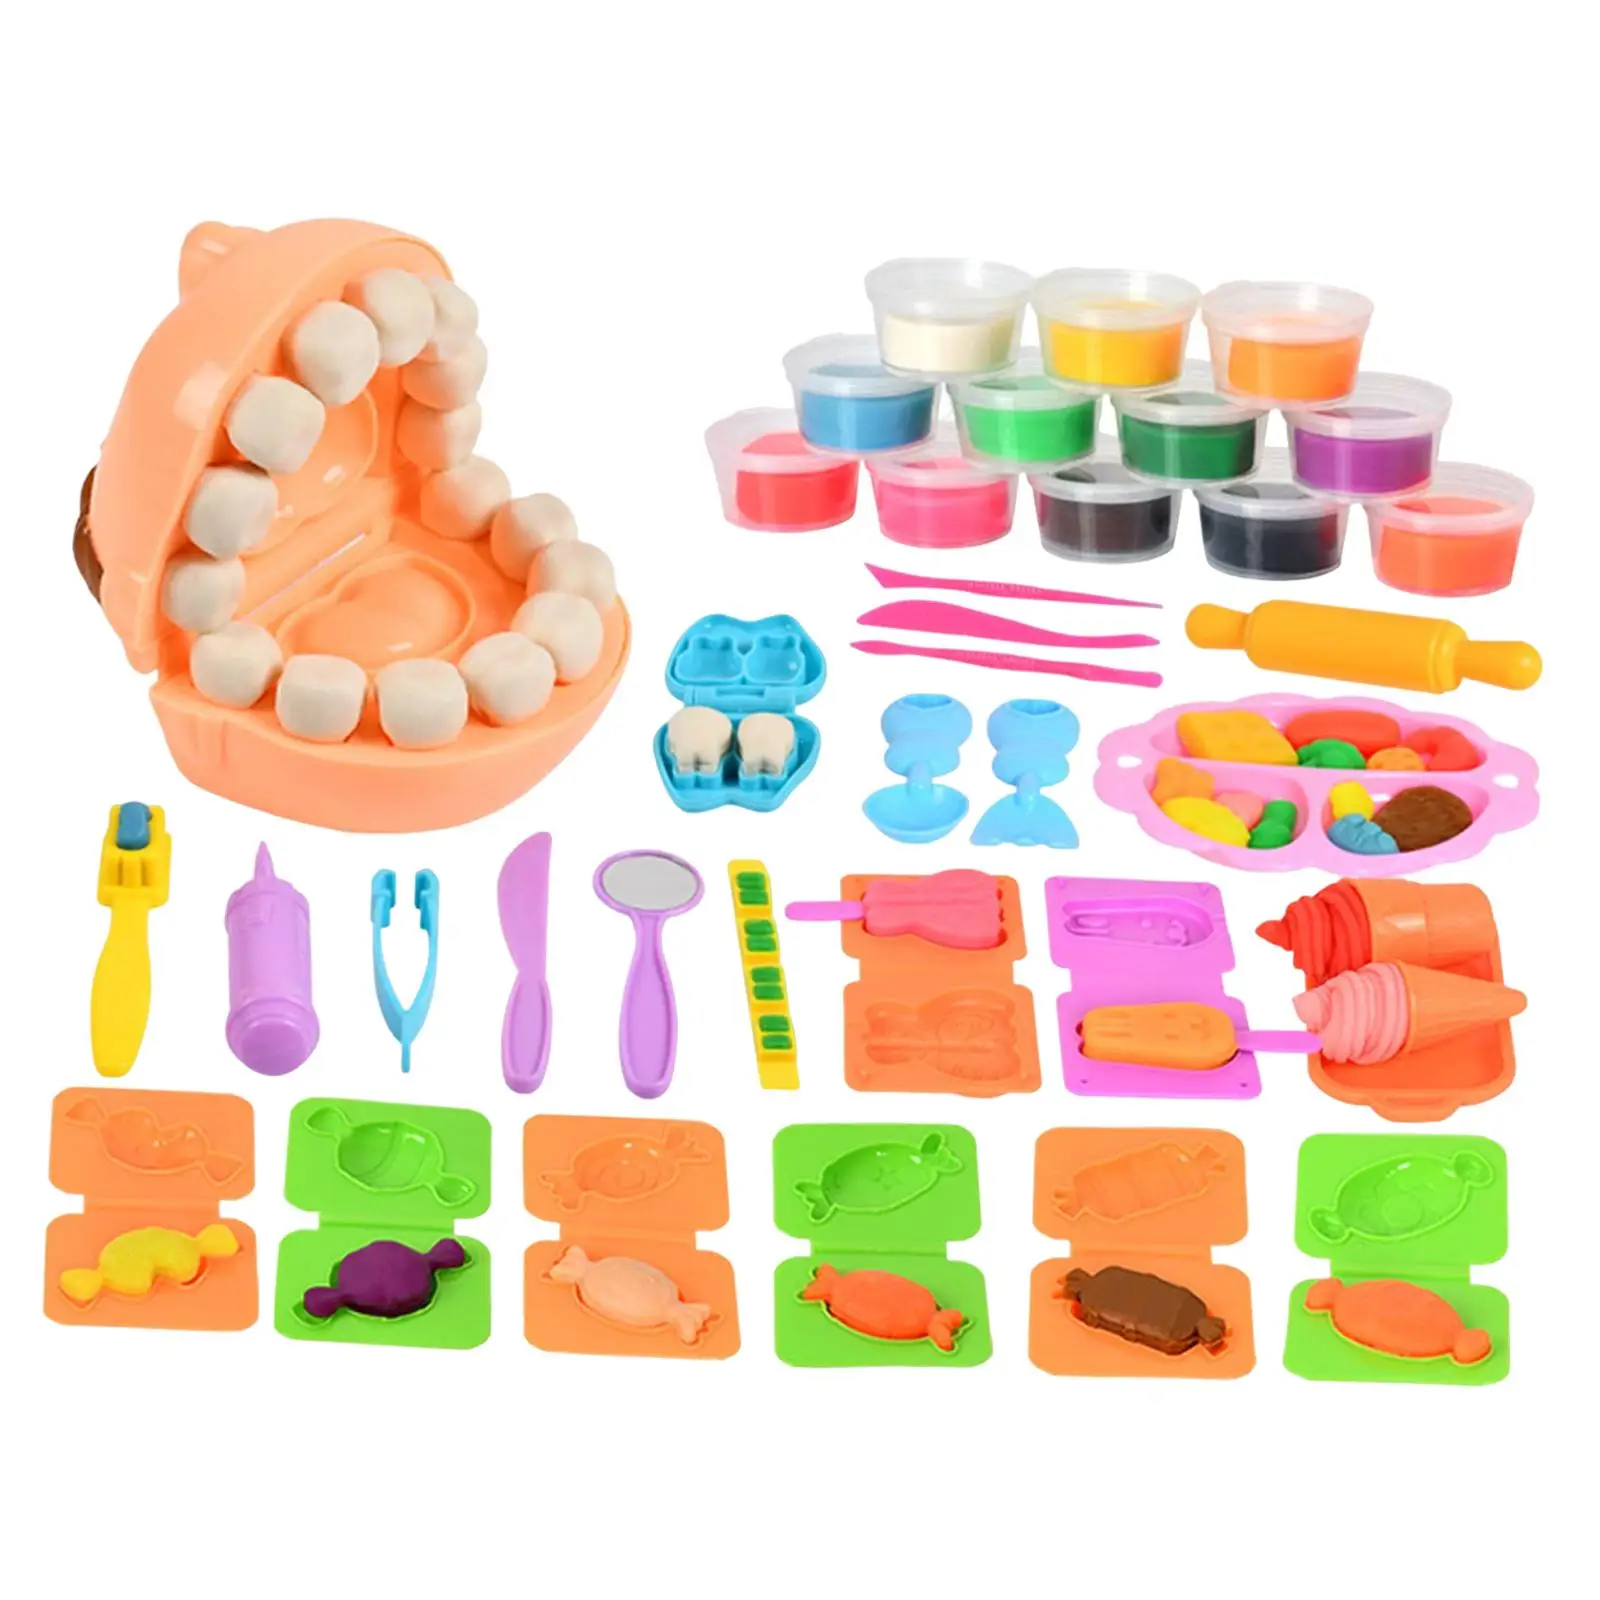 Modeling Clay Set with Accessoires Educational Art Crafts for Gift